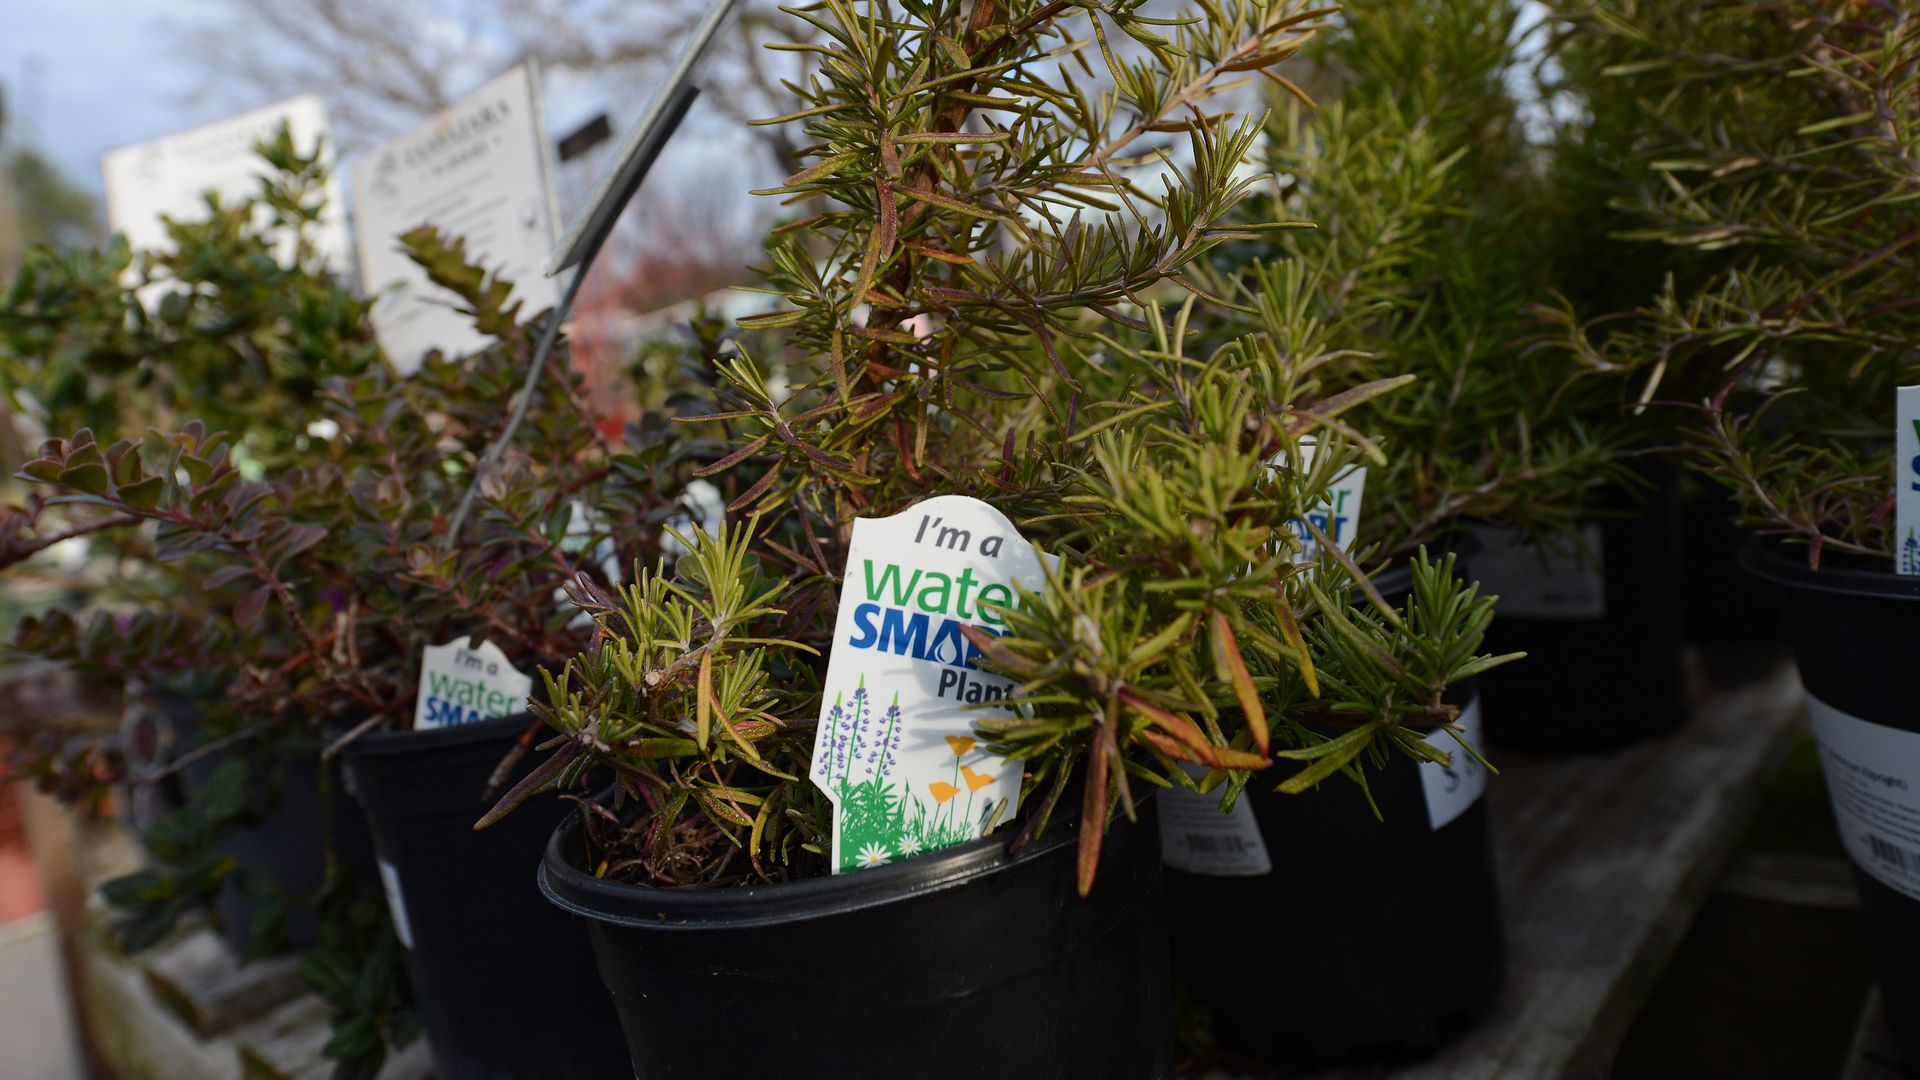 A rosemary plant in a pot with a tag that says the plant is water-conserving.